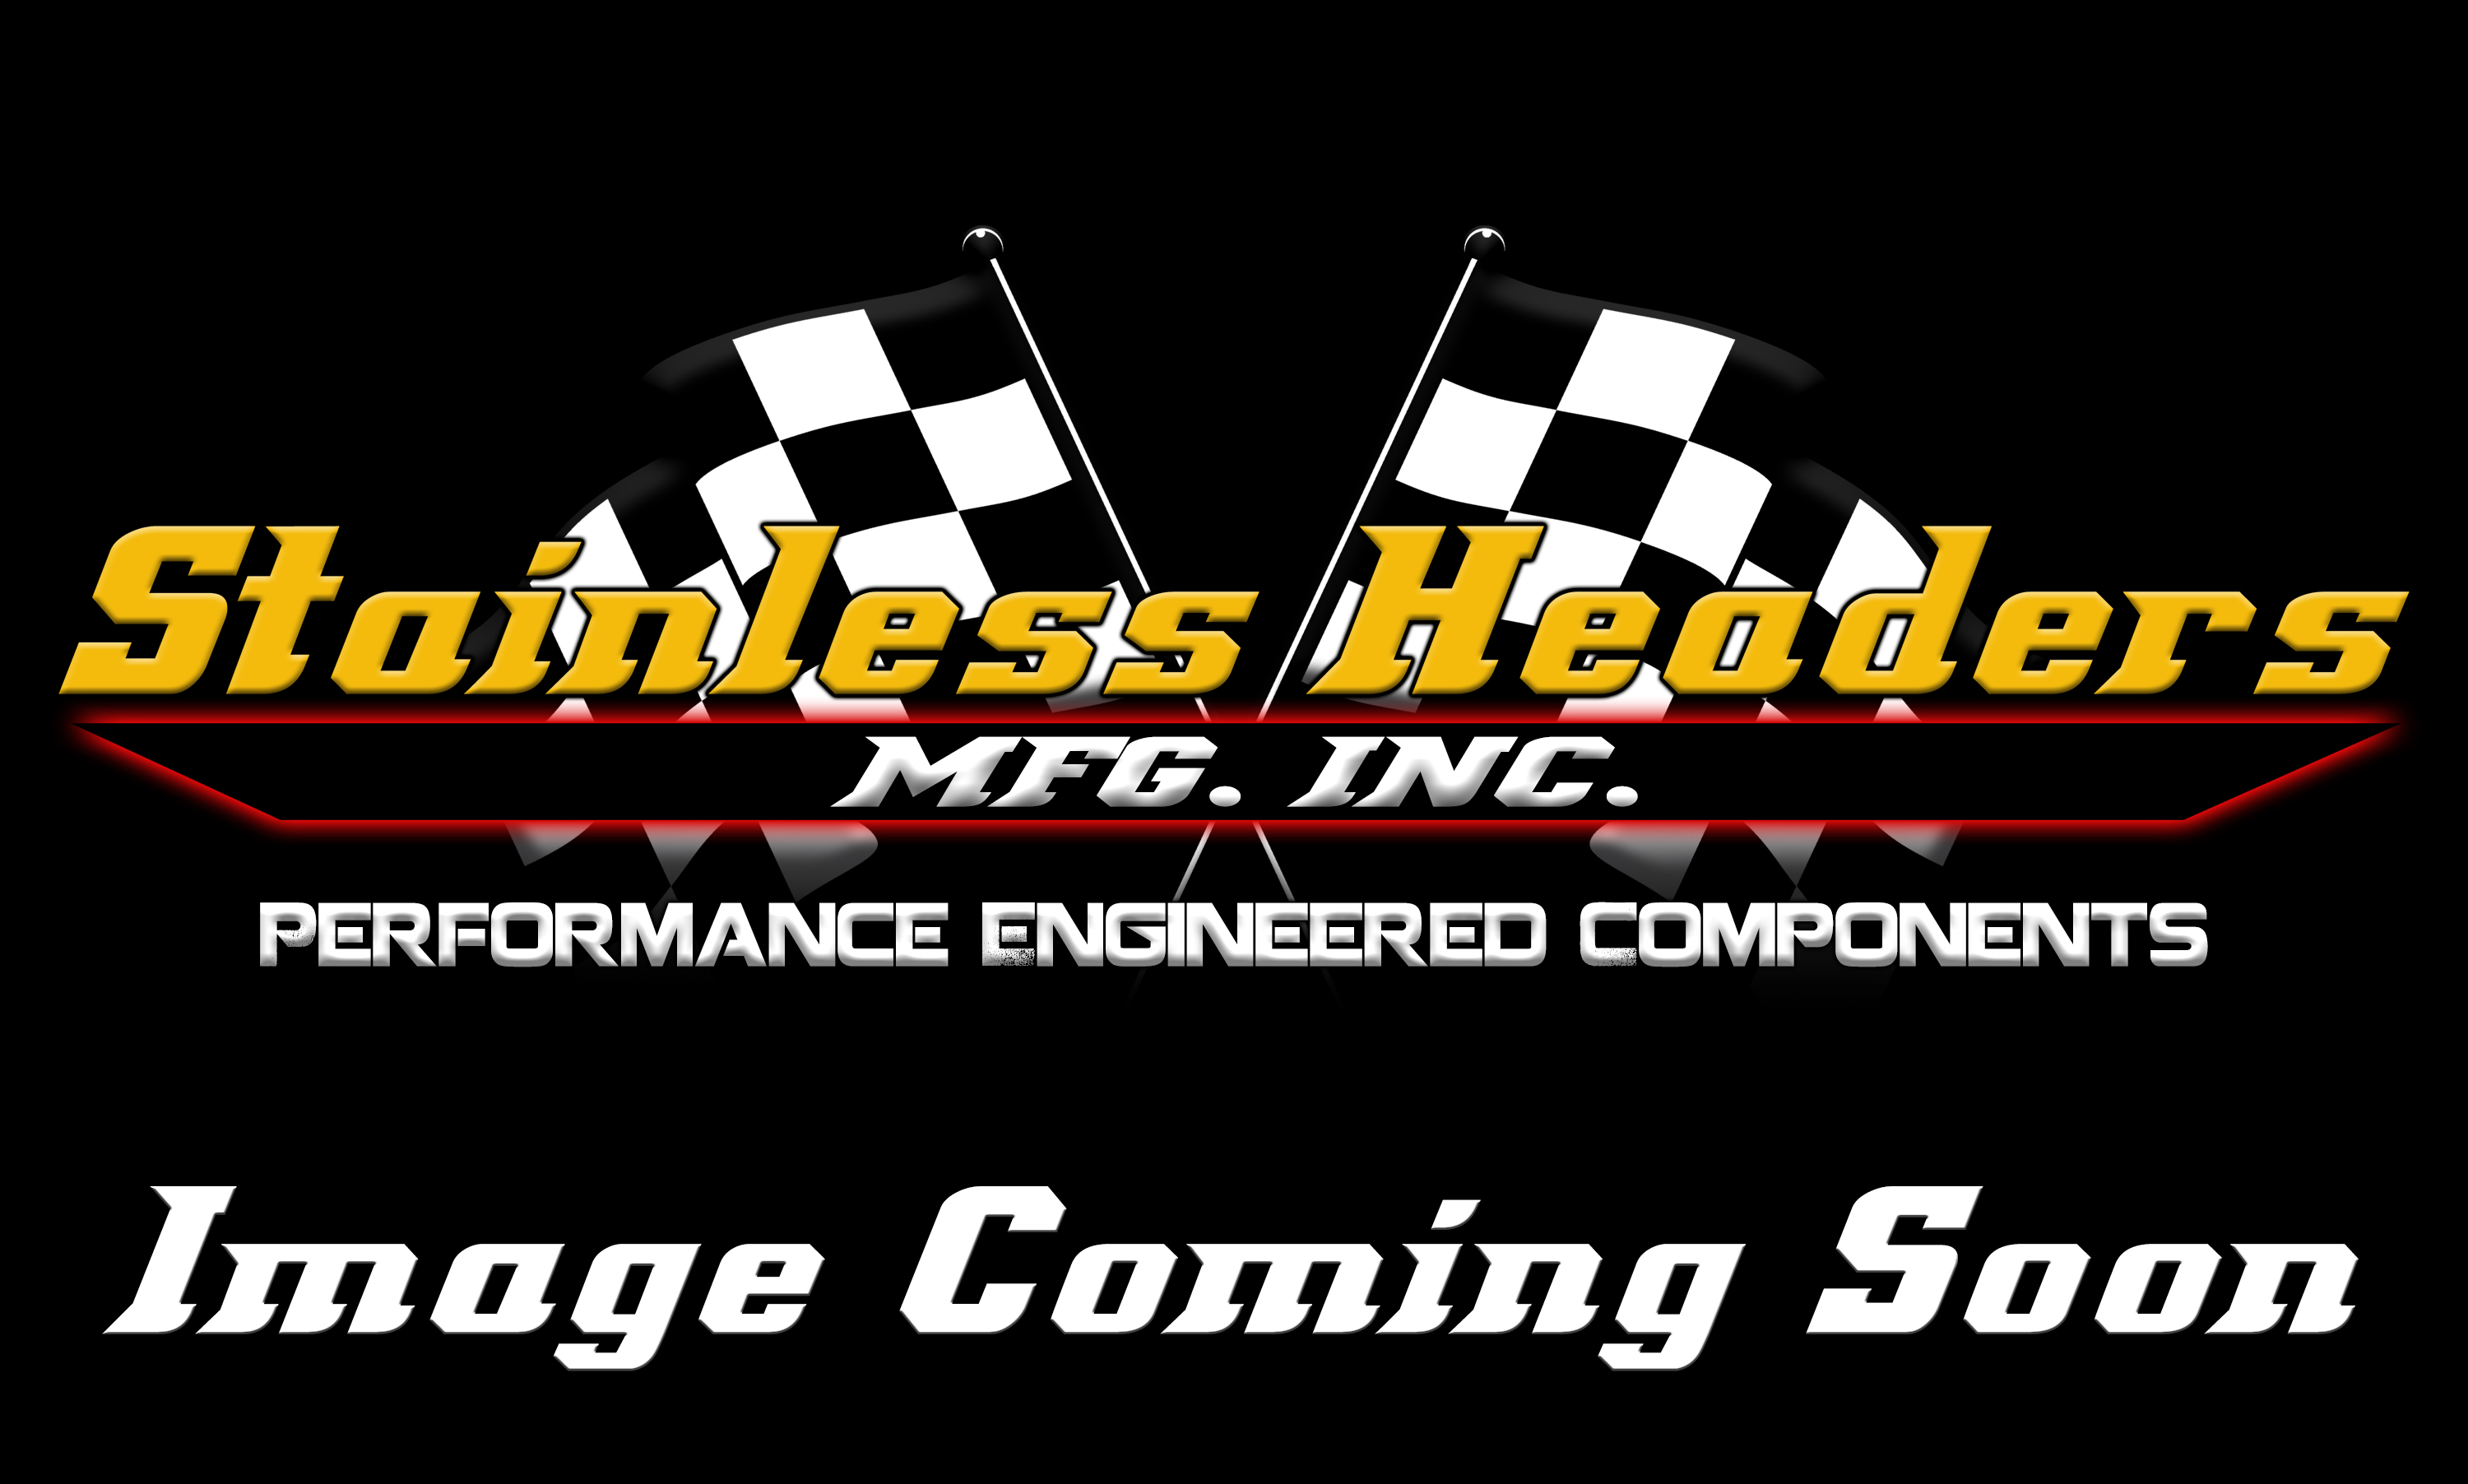 Stainless Headers - 2 3/8" Primary 4 into 1 Performance Merge Collector-16ga 304ss - Image 1